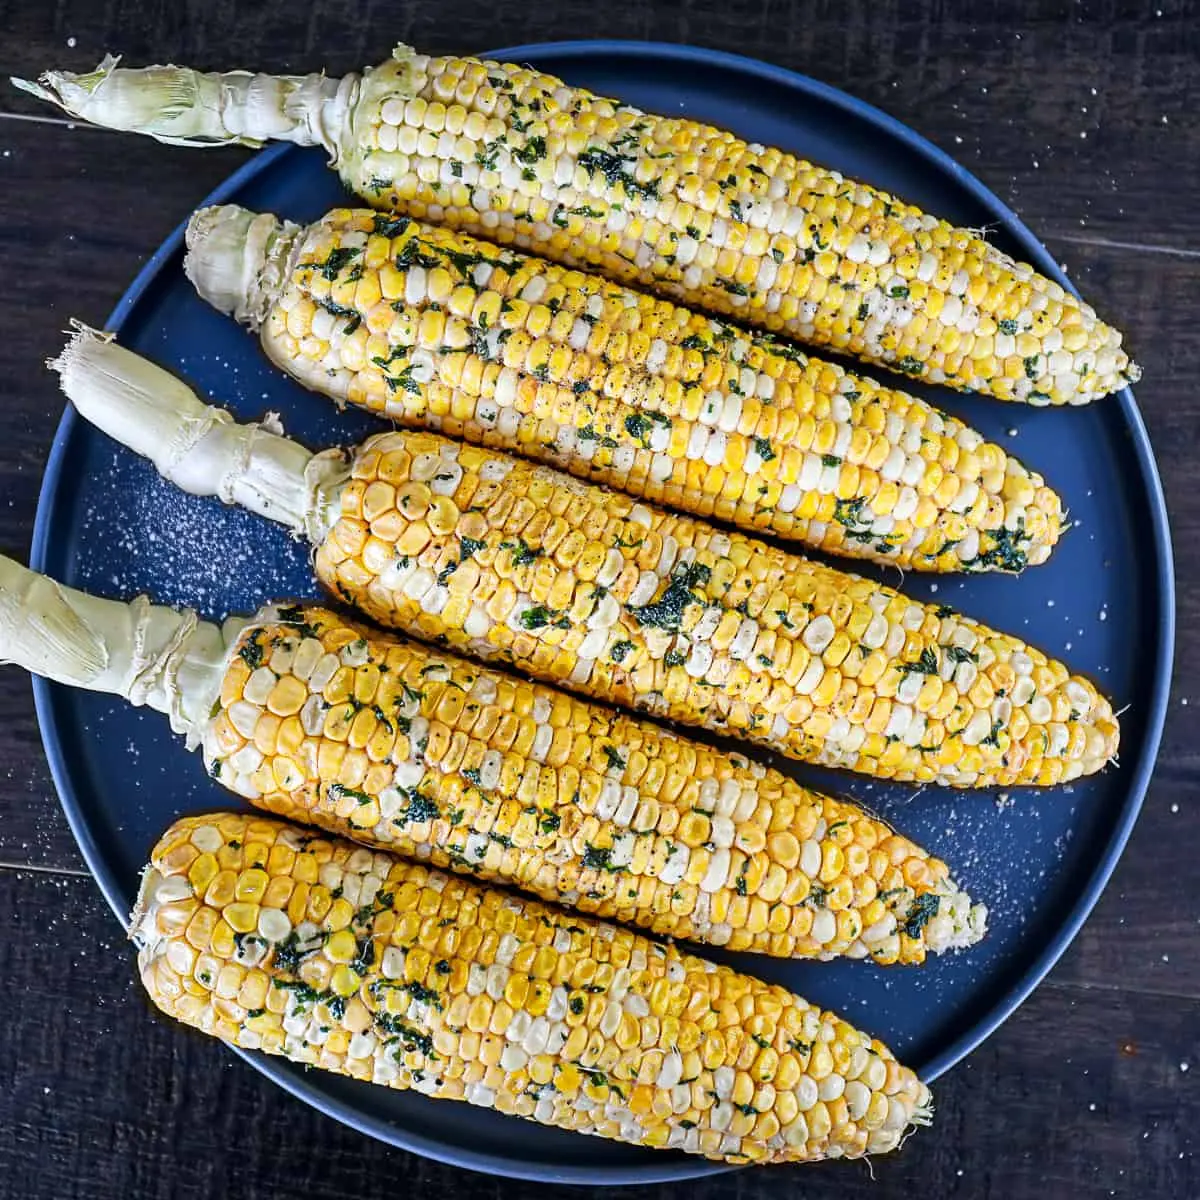 how to make smoked corn on the cob - Does corn on the cob need to be soaked before grilling